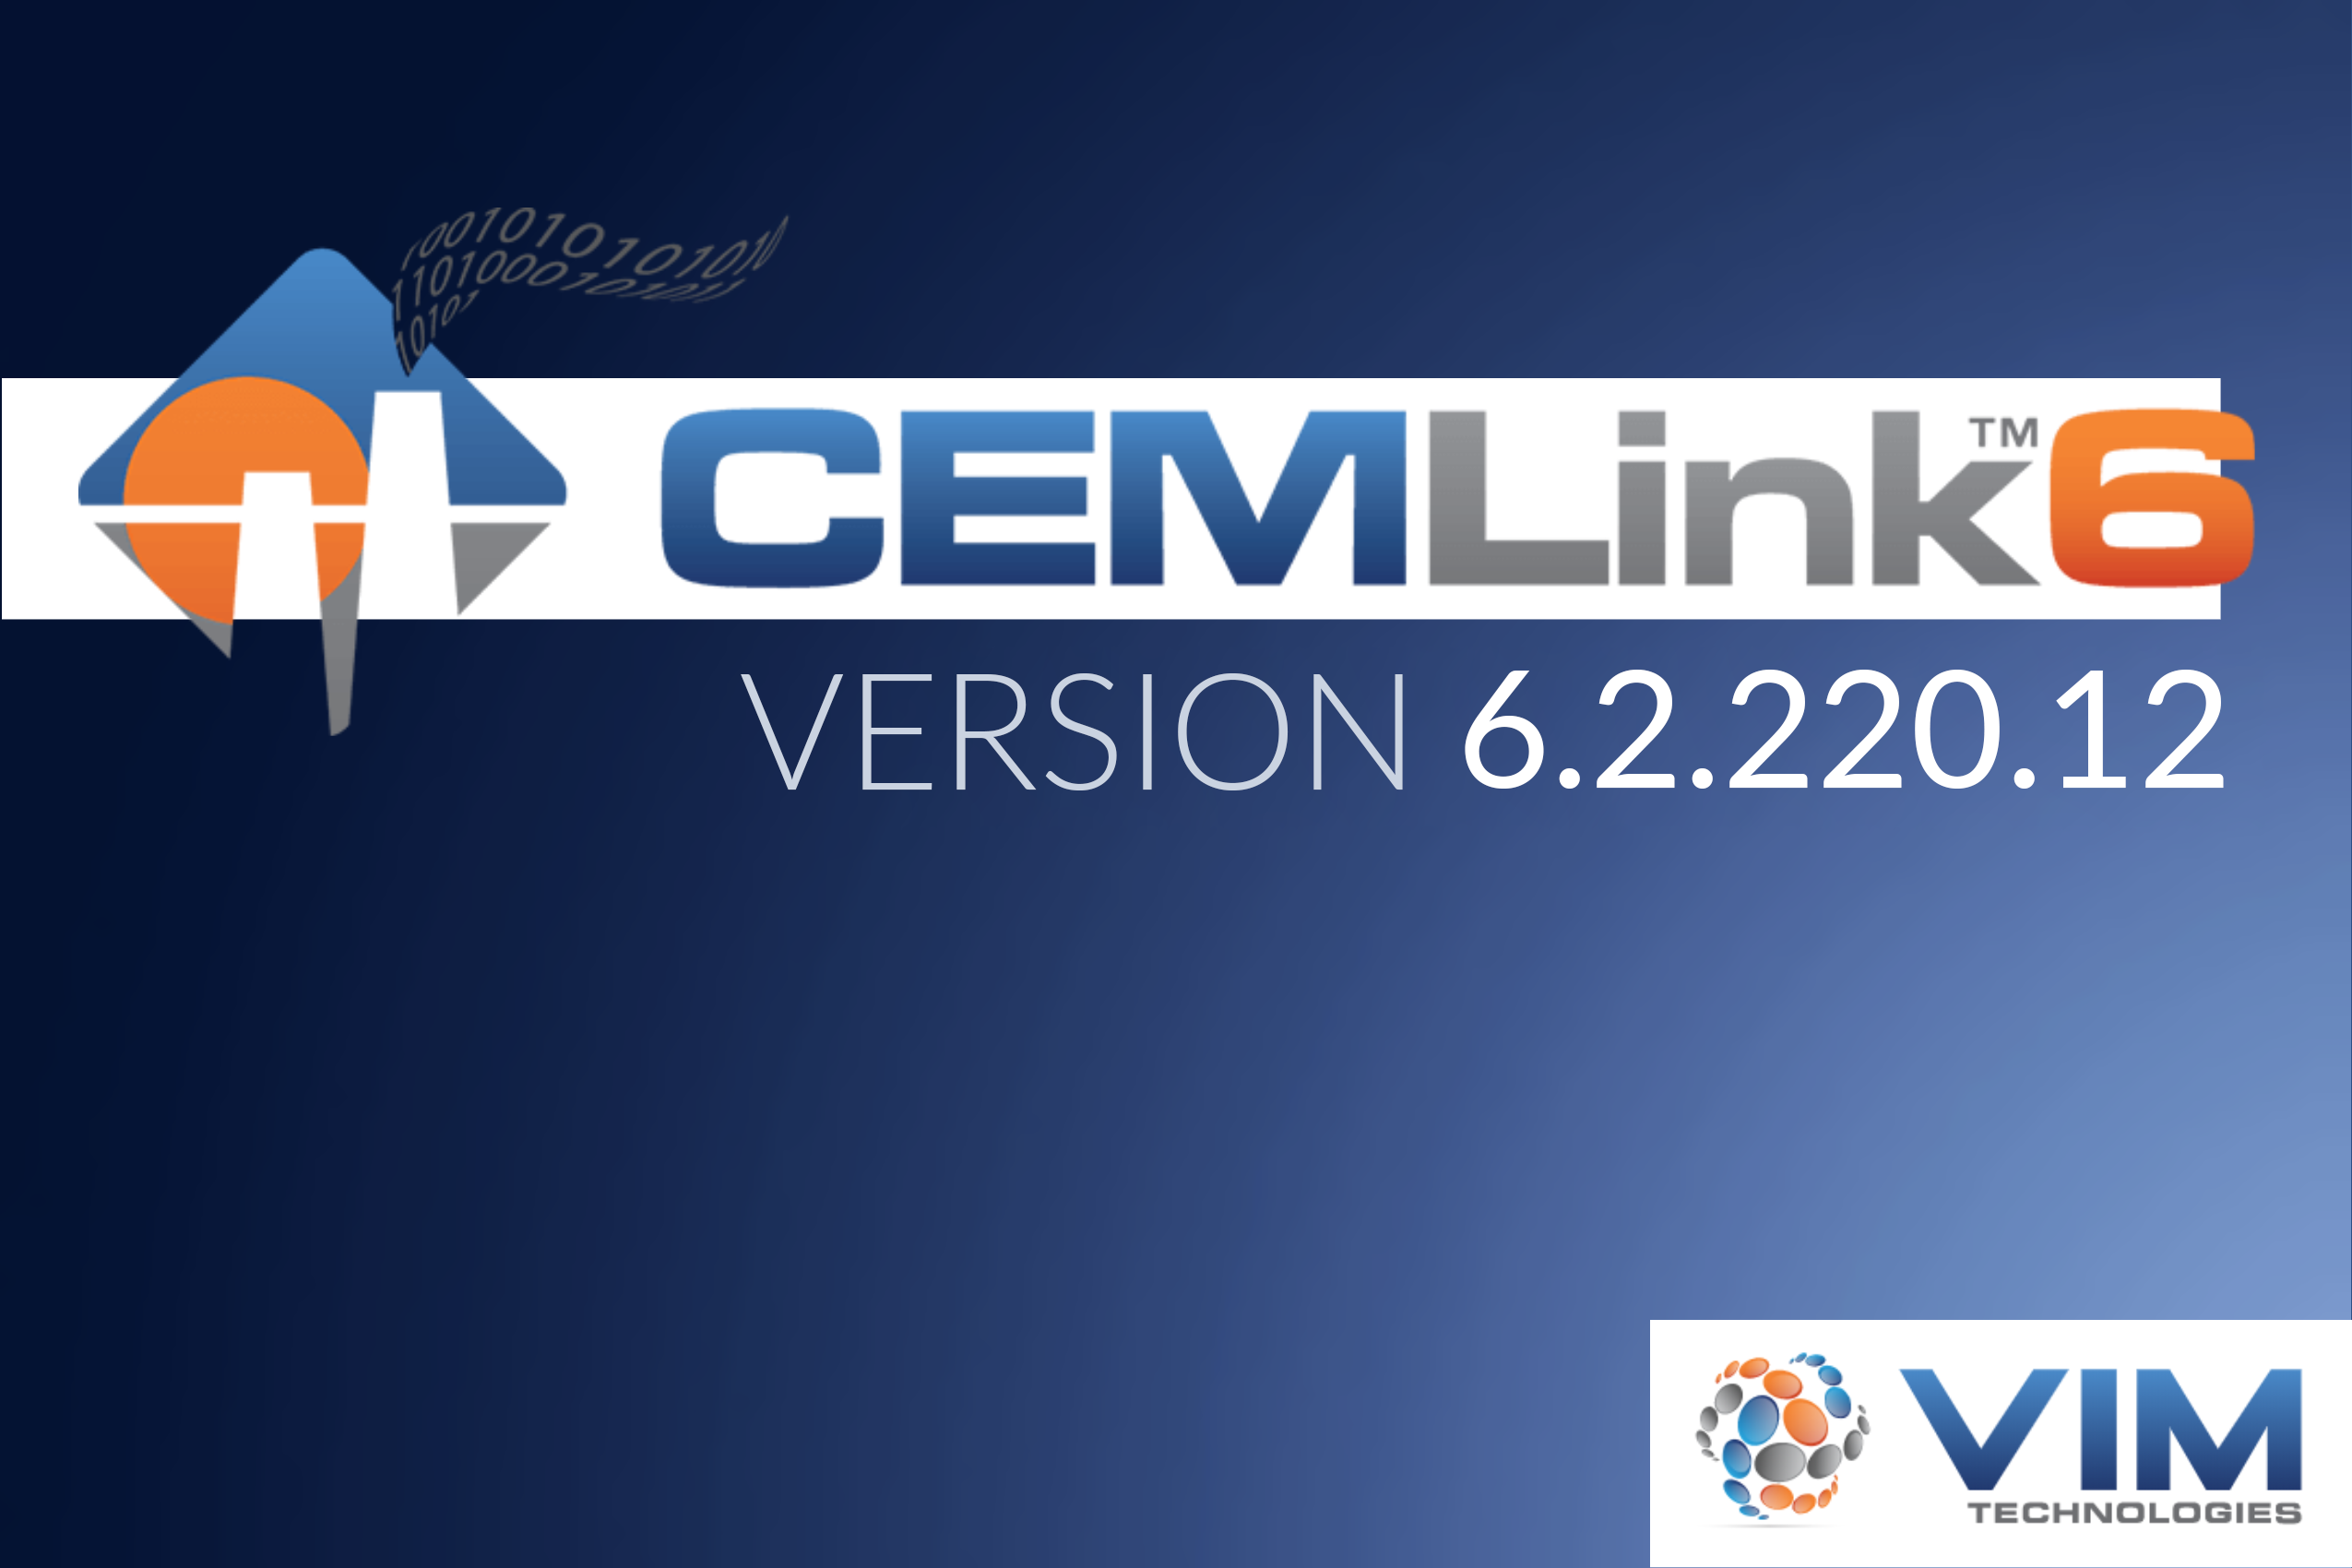 Version 6.2.220.12 of CEMLink6 Now Available